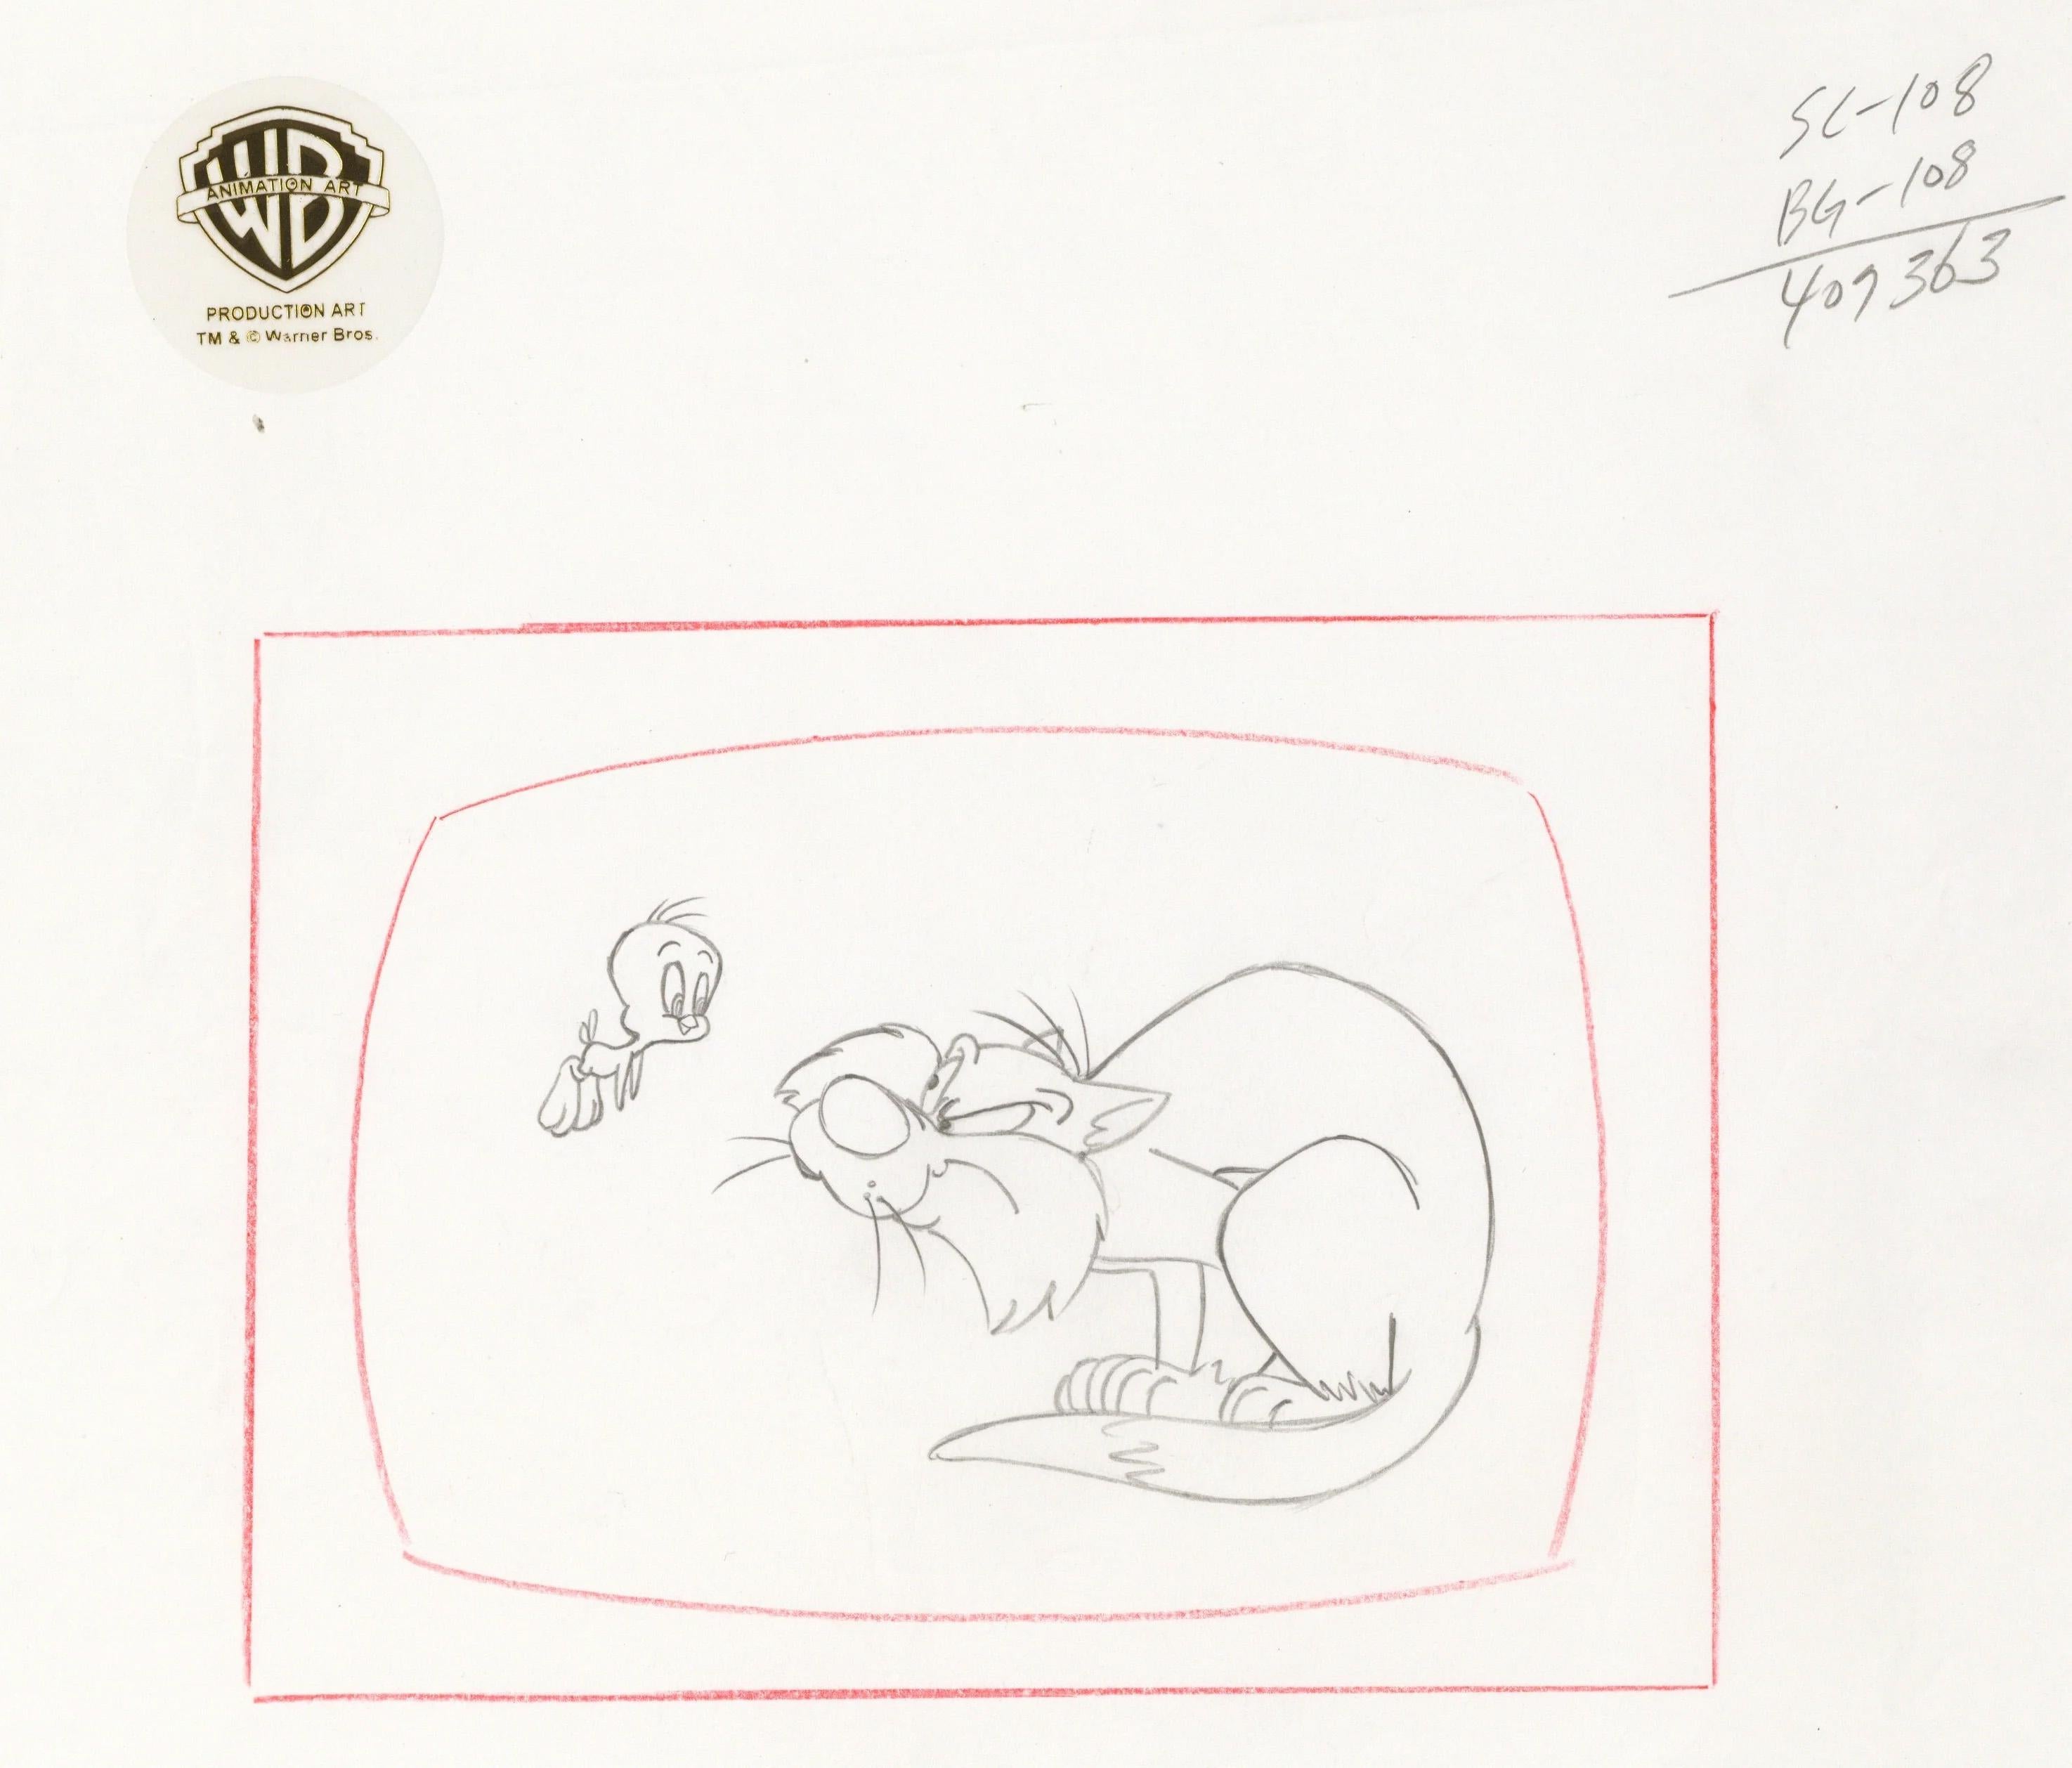 Looney Tunes Original Production Drawing: Sylvester and Tweety - Art by Looney Tunes Studio Artists